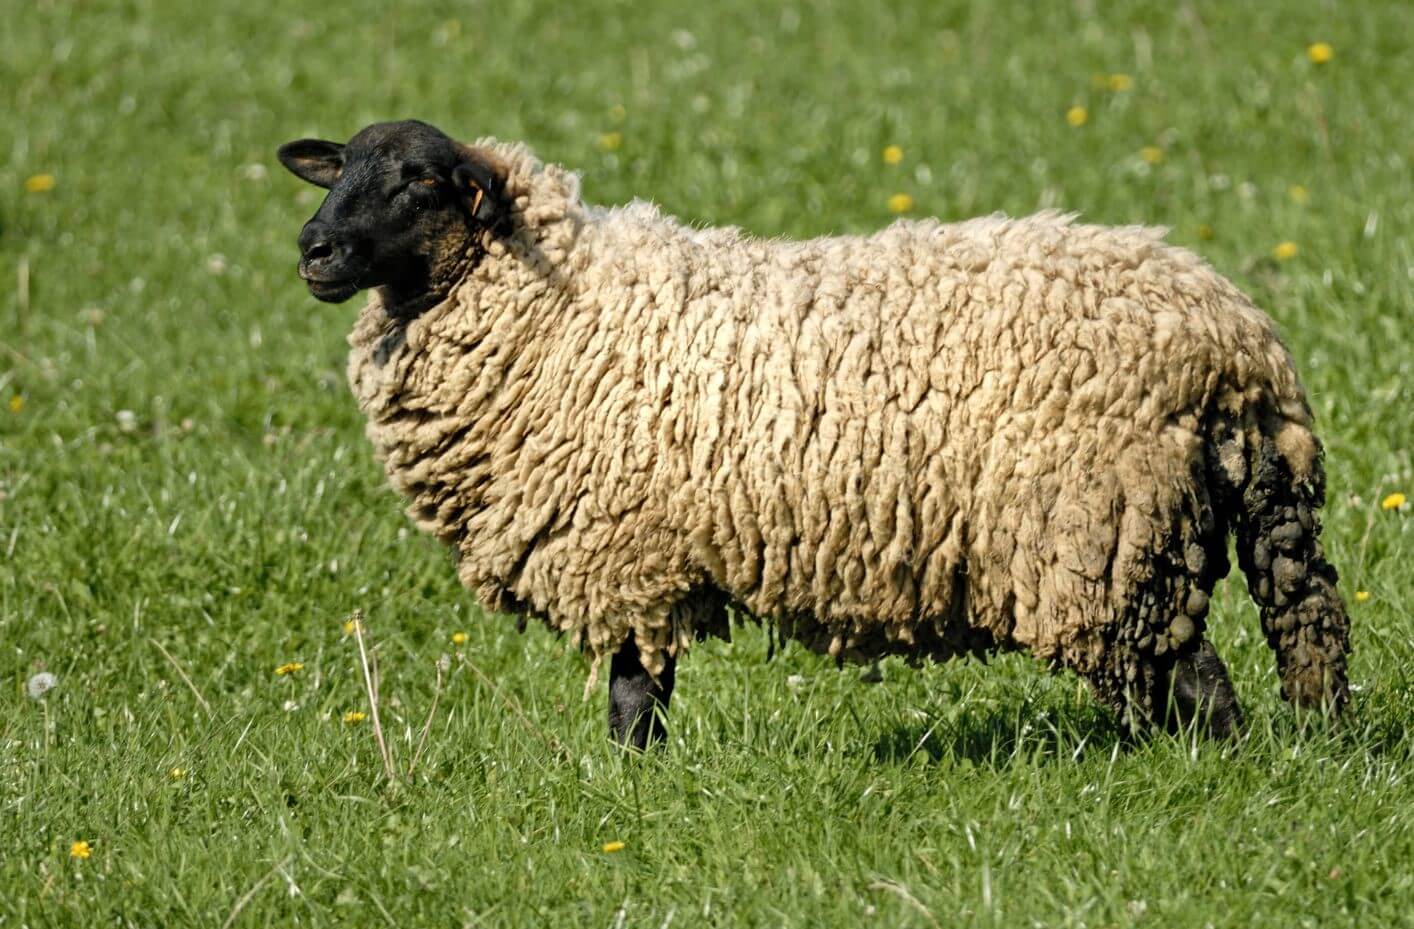 Preventing Blowfly and Flystrike in Sheep